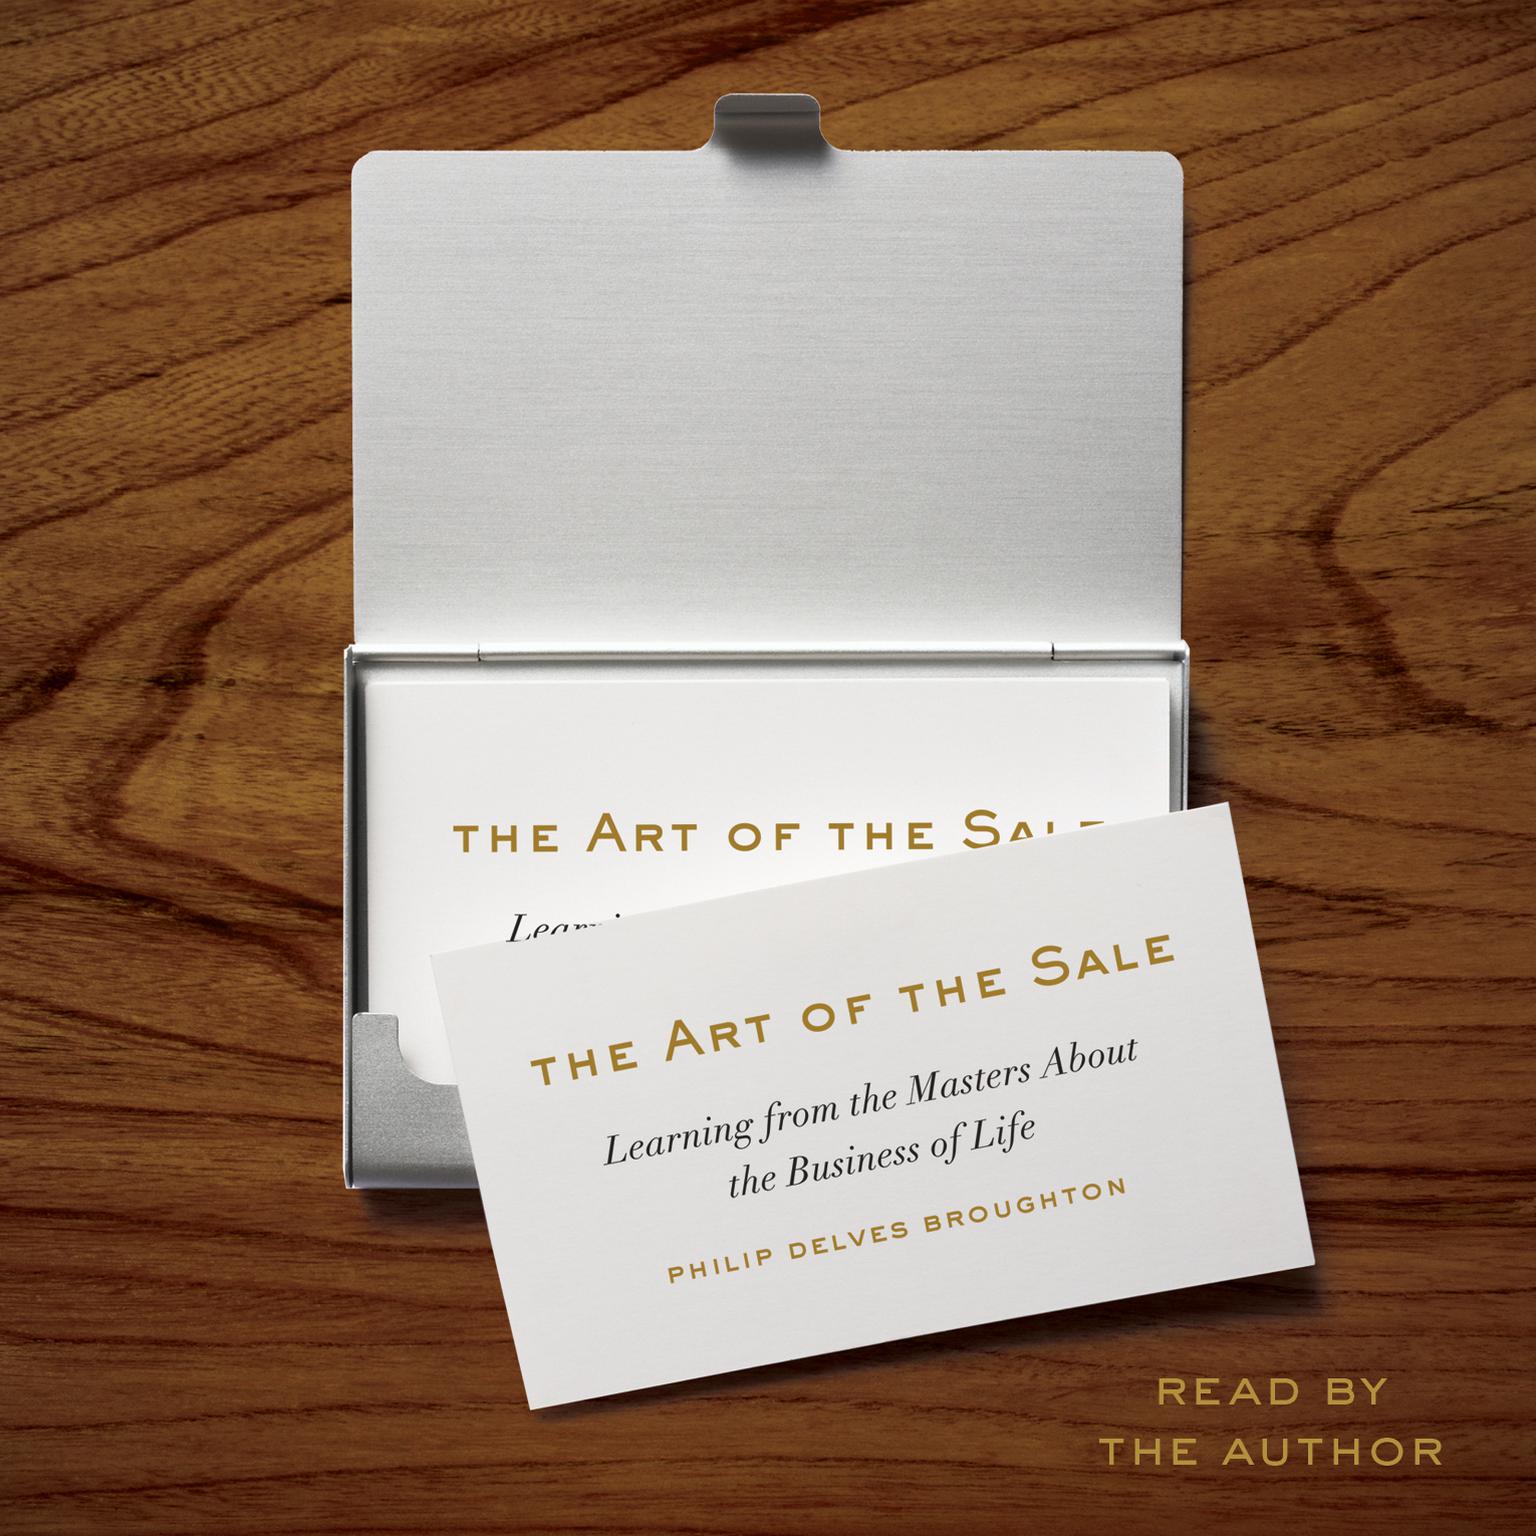 The Art of the Sale: Learning from the Masters About the Business of Life Audiobook, by Philip Delves Broughton